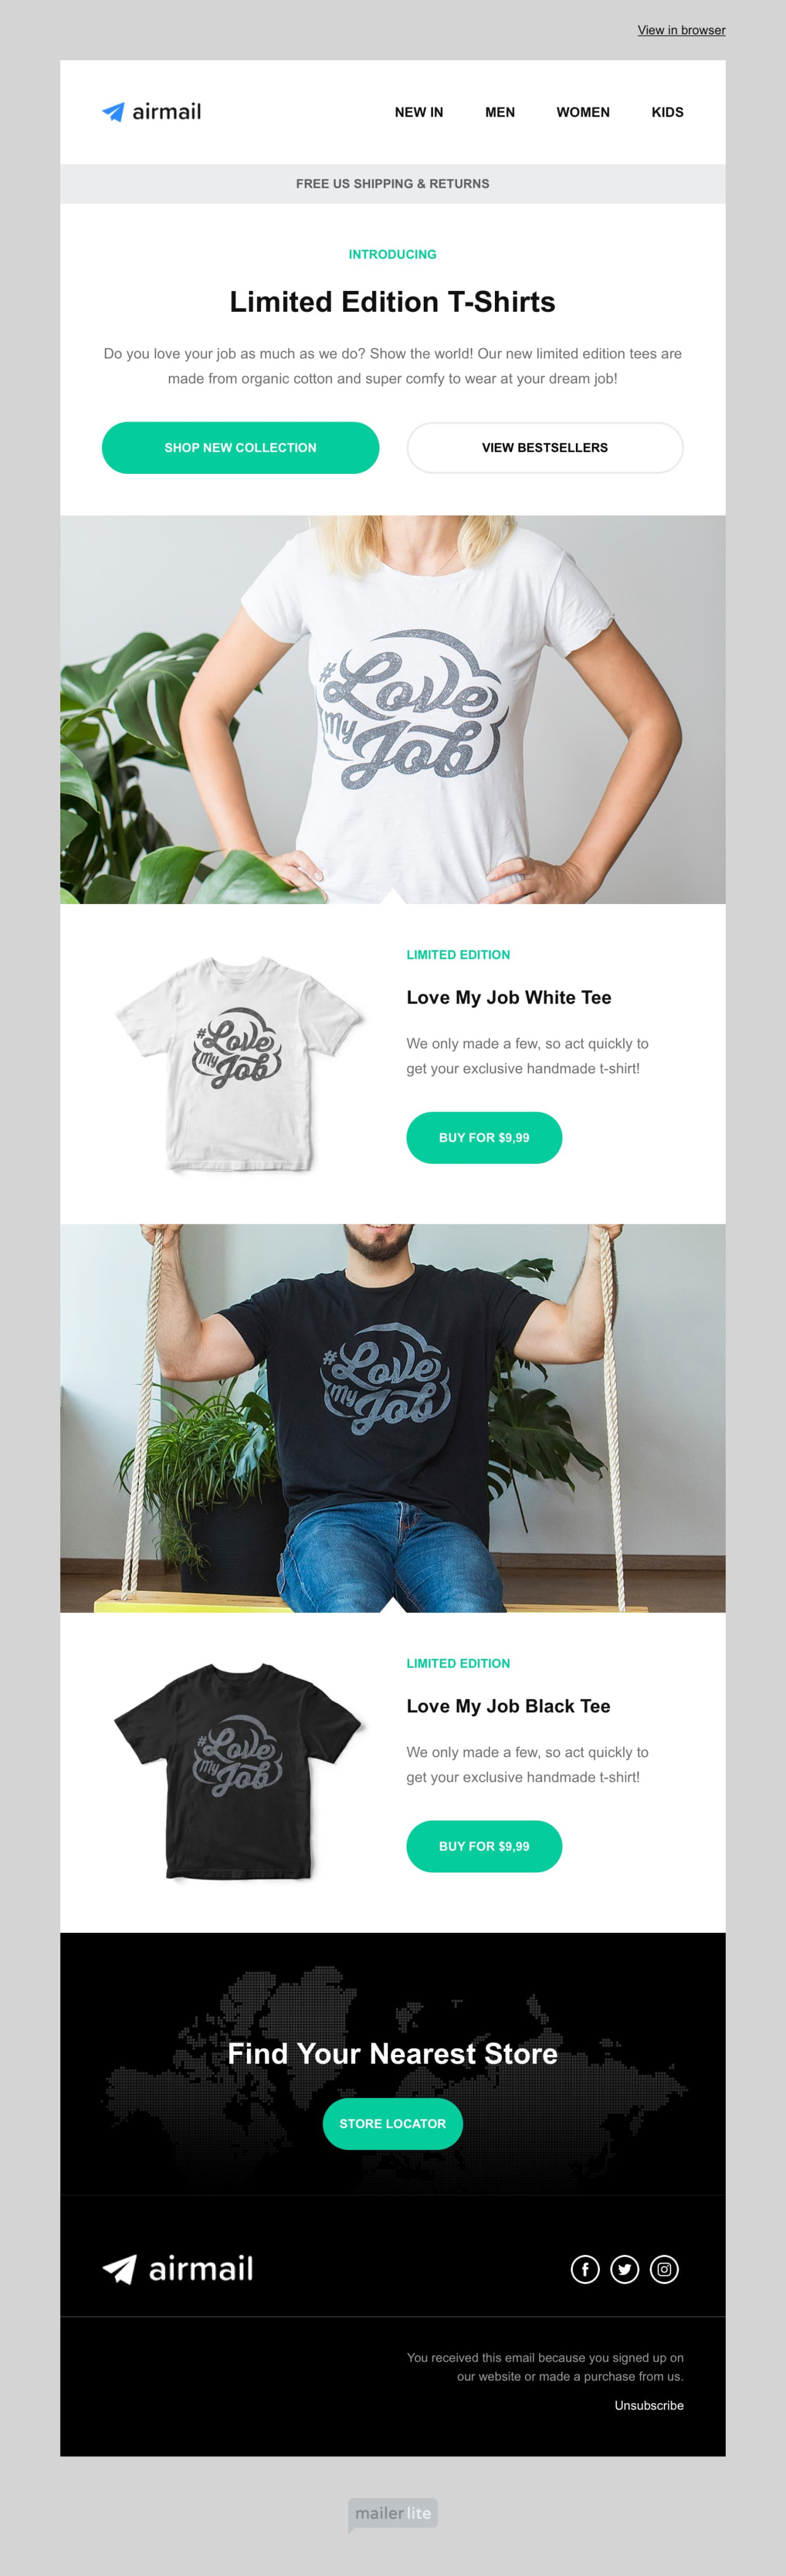 E-commerce #2 template - Made by MailerLite